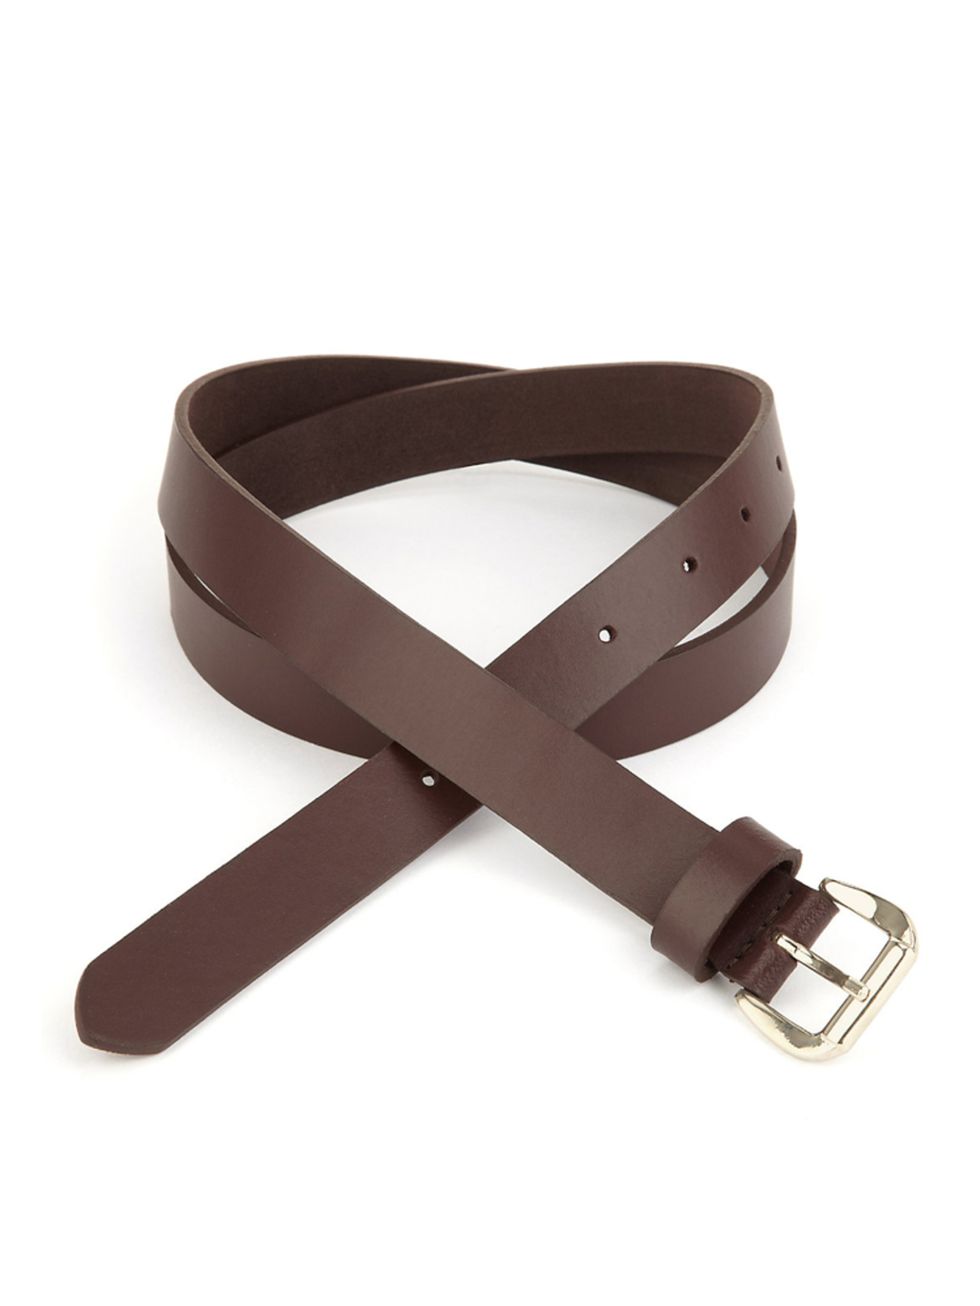 <p>Simple, yet effective, this waist belt can dress up your summer kaftans and kimonos so you are restaurant ready.&nbsp;</p>

<p><a href="http://www.marksandspencer.com/leather-square-buckle-belt/p/p22103014" target="_blank">Marks and Spencer</a>&nbsp;be